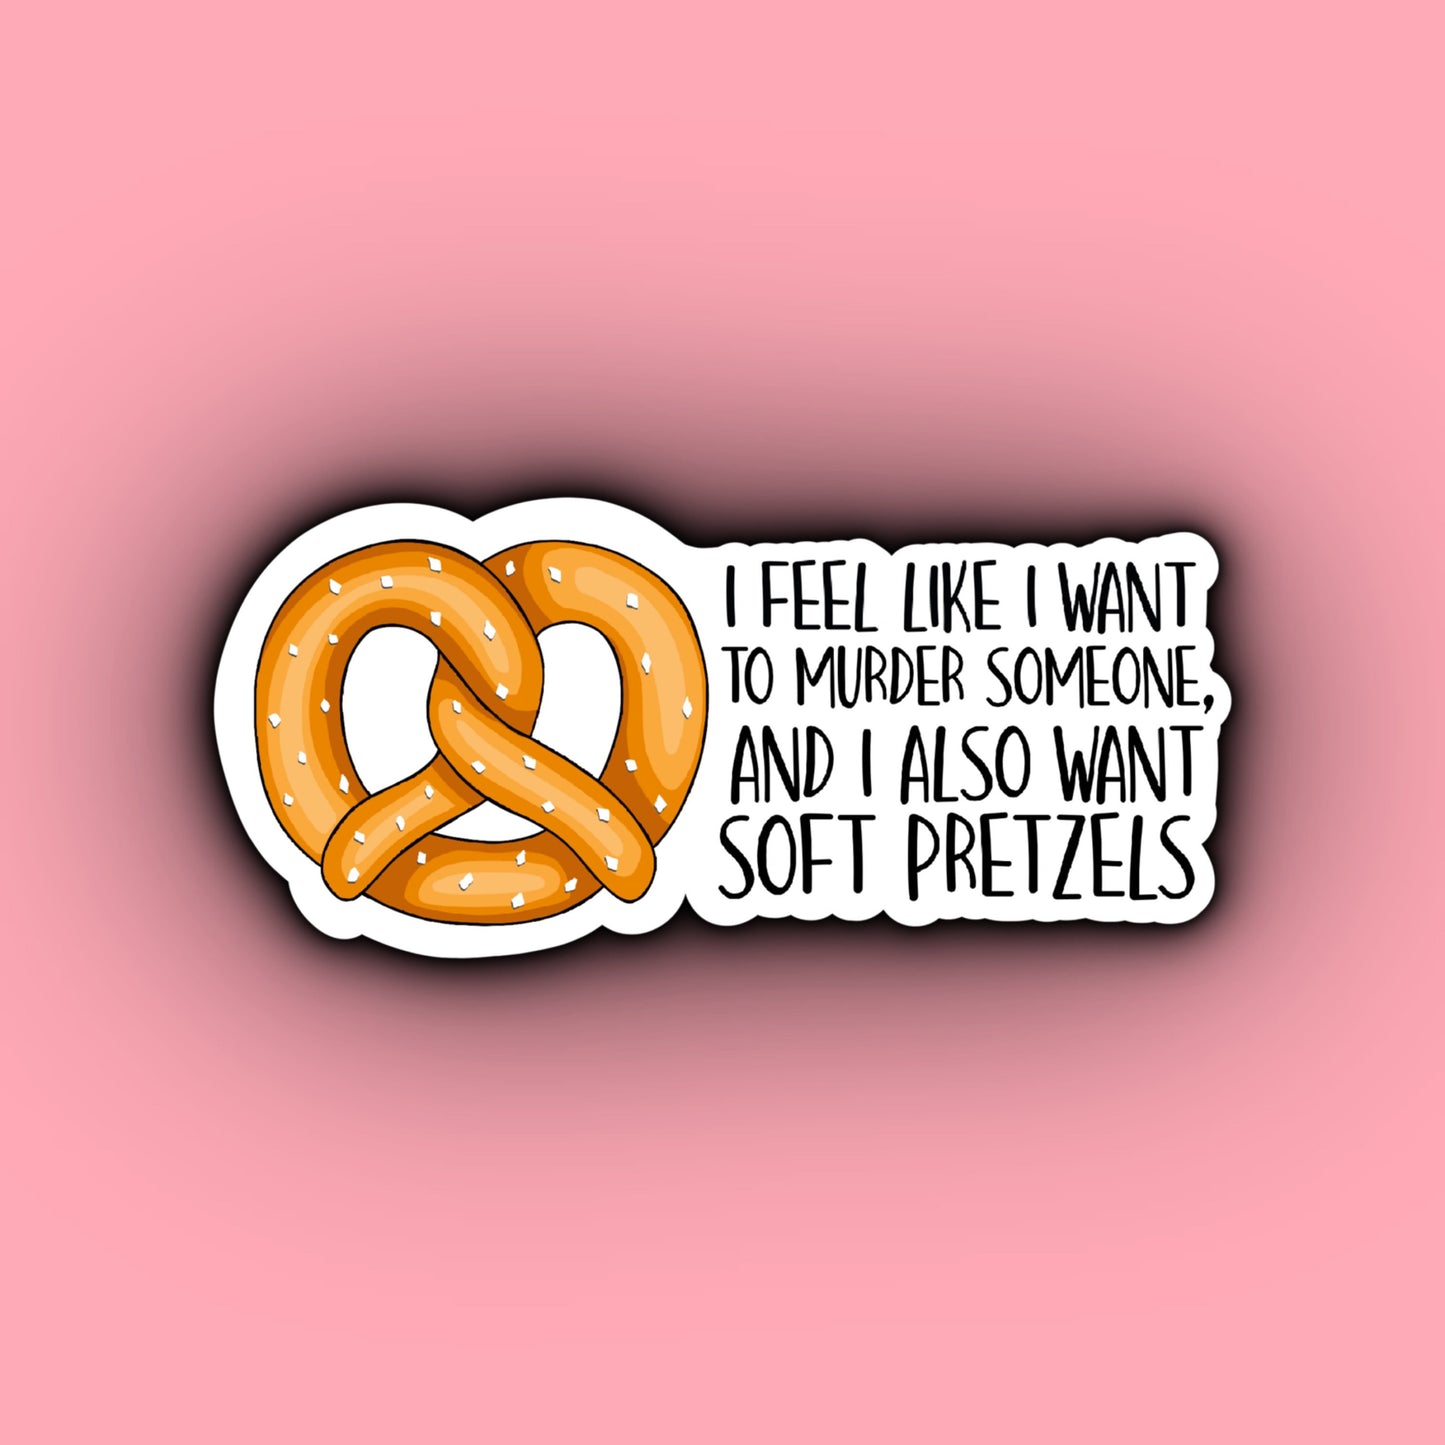 And I Also Want Soft Pretzels... | Jess Day | New Girl | New Girl TV Show